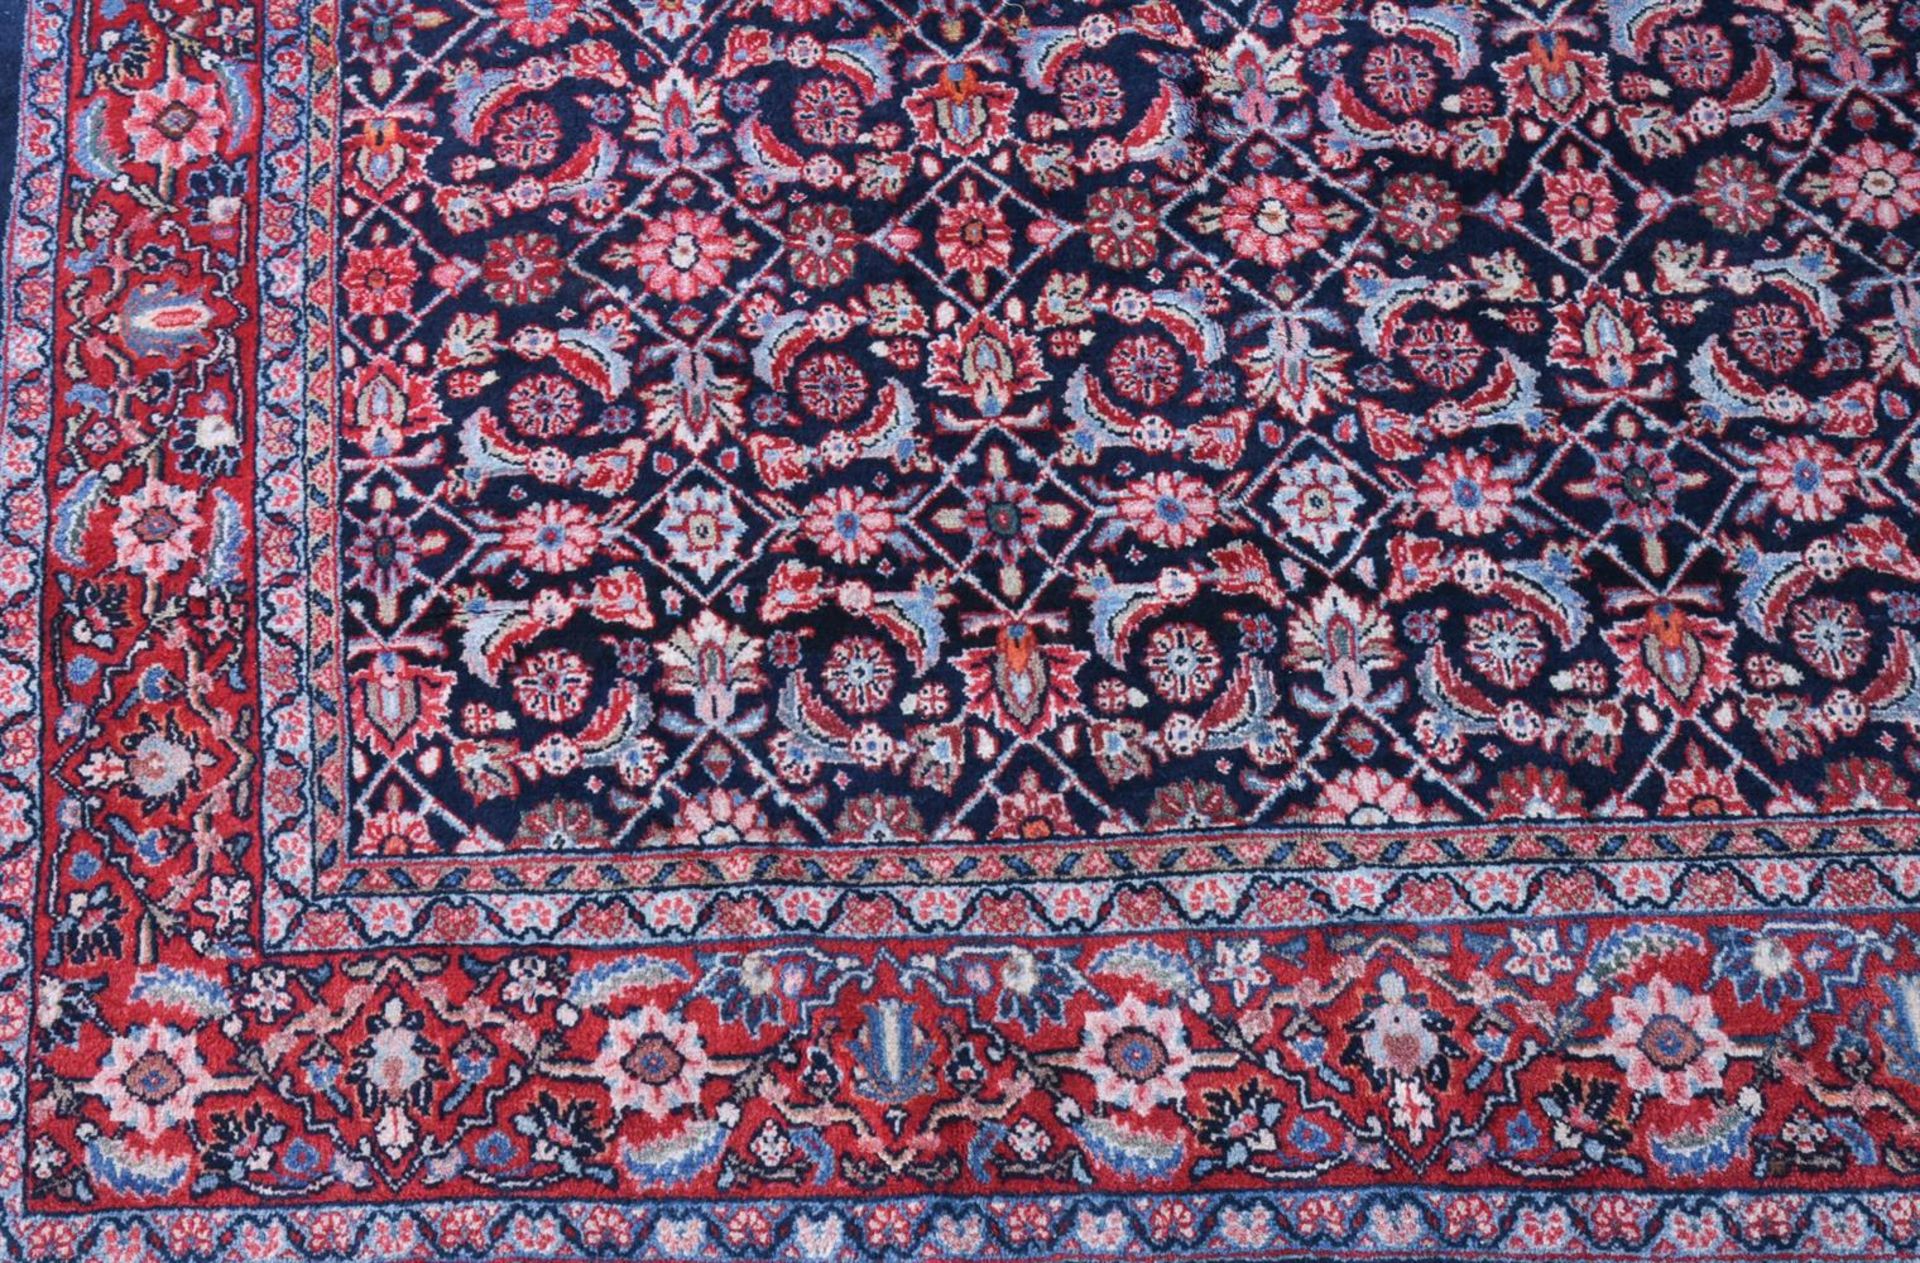 A PERSIAN WOOL CARPET IN HERATI STYLE - Image 2 of 2